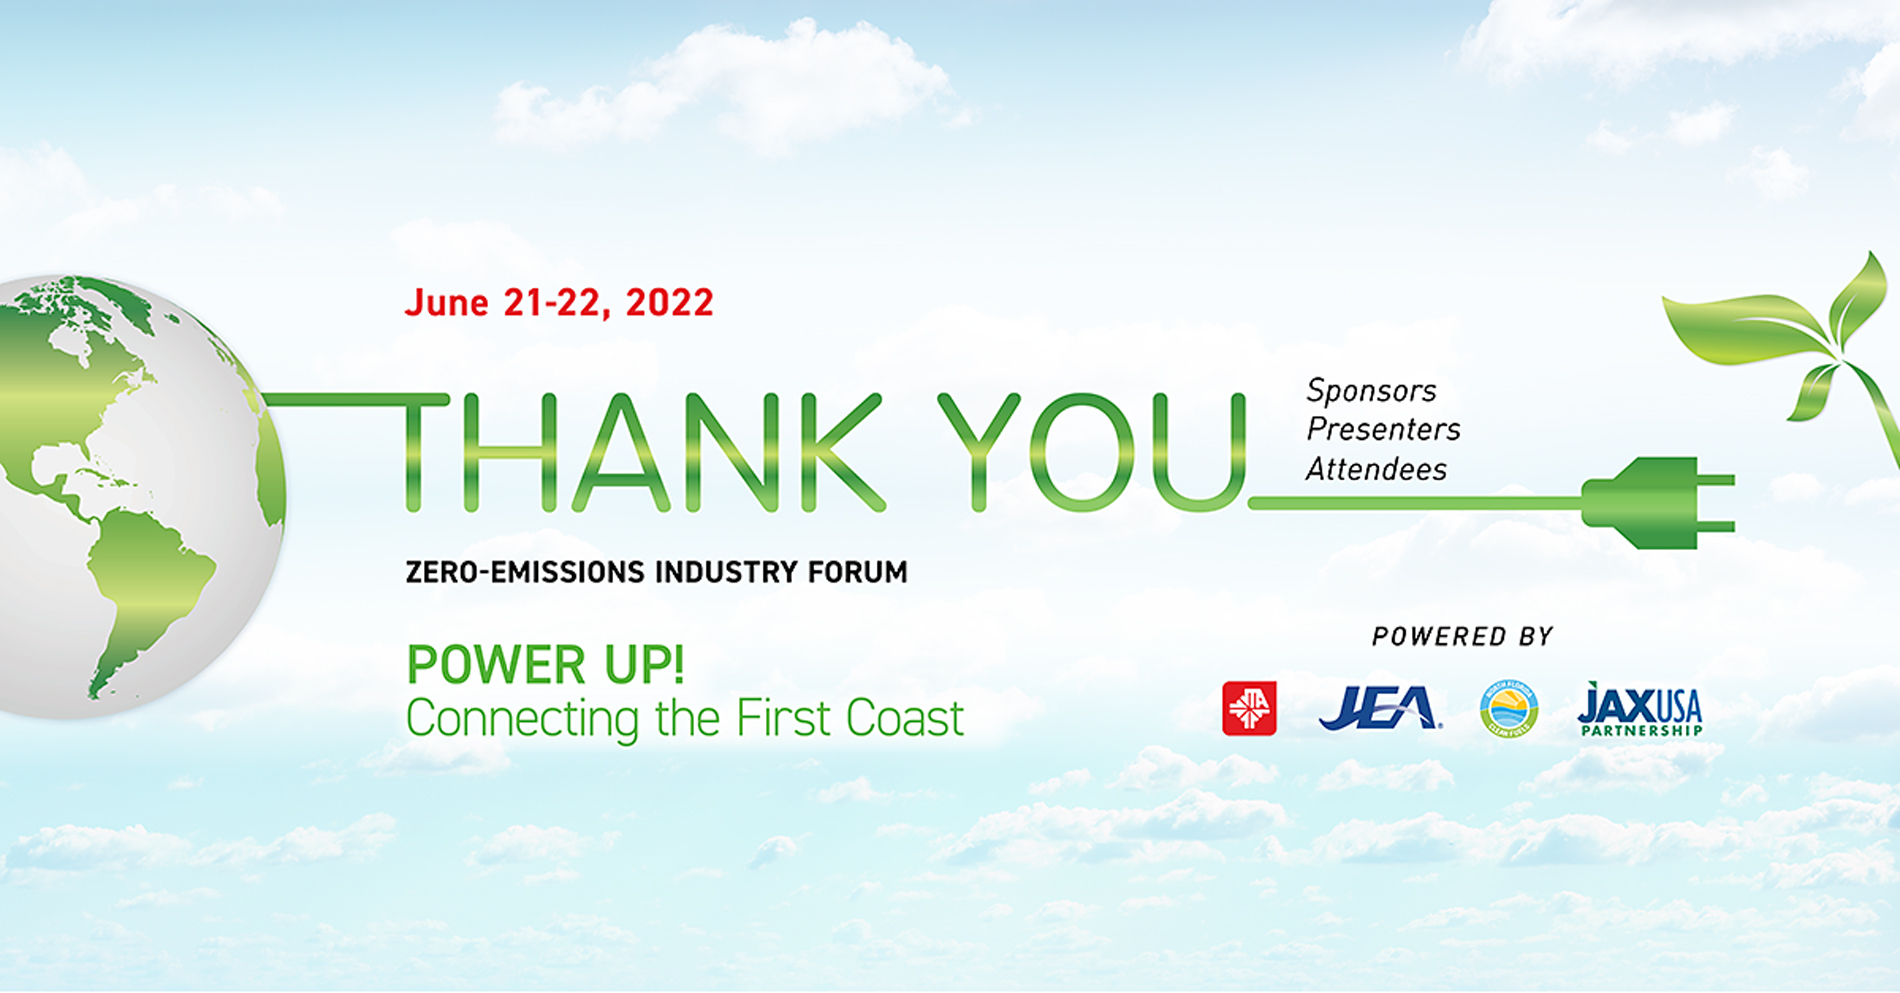 Thank You for Supporting Zero-Emissions Industry Forum